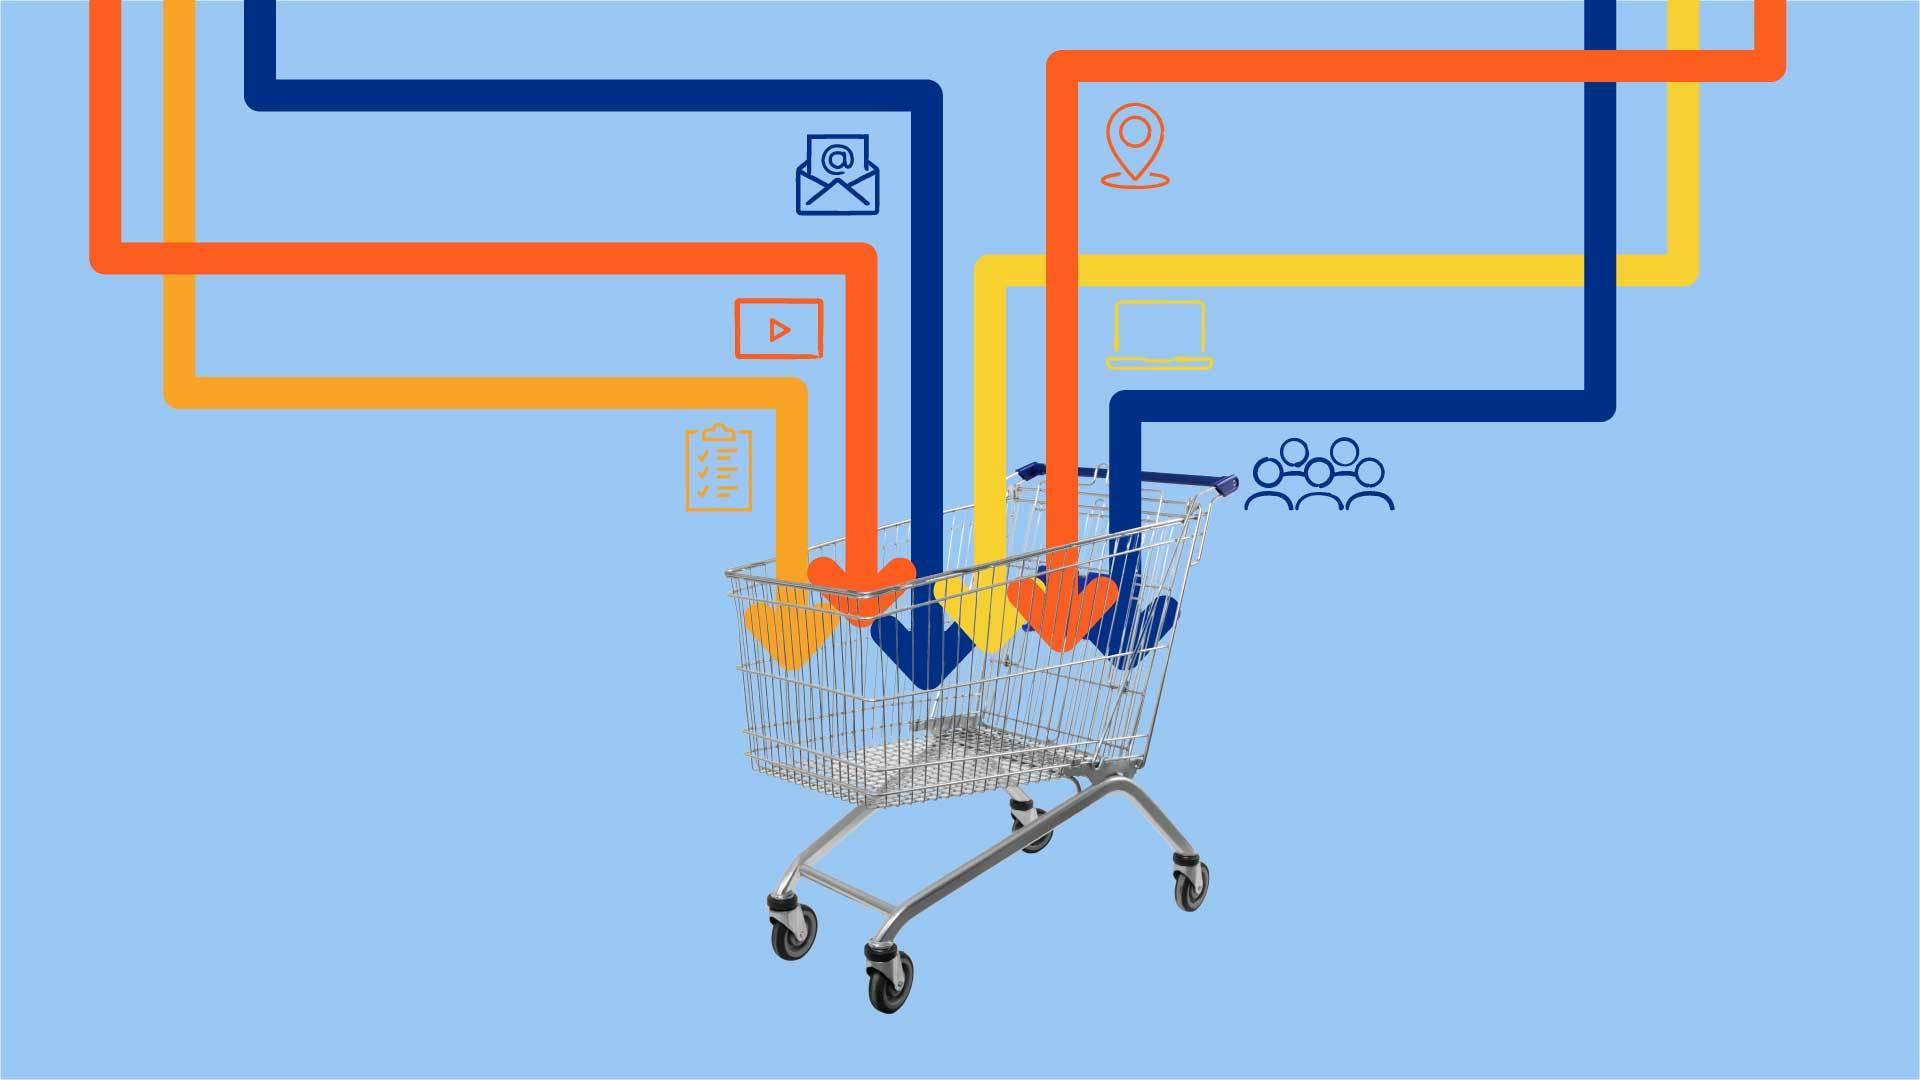 Graphic shows multiple colored arrows that represent varying social icons pointing into a shopping cart